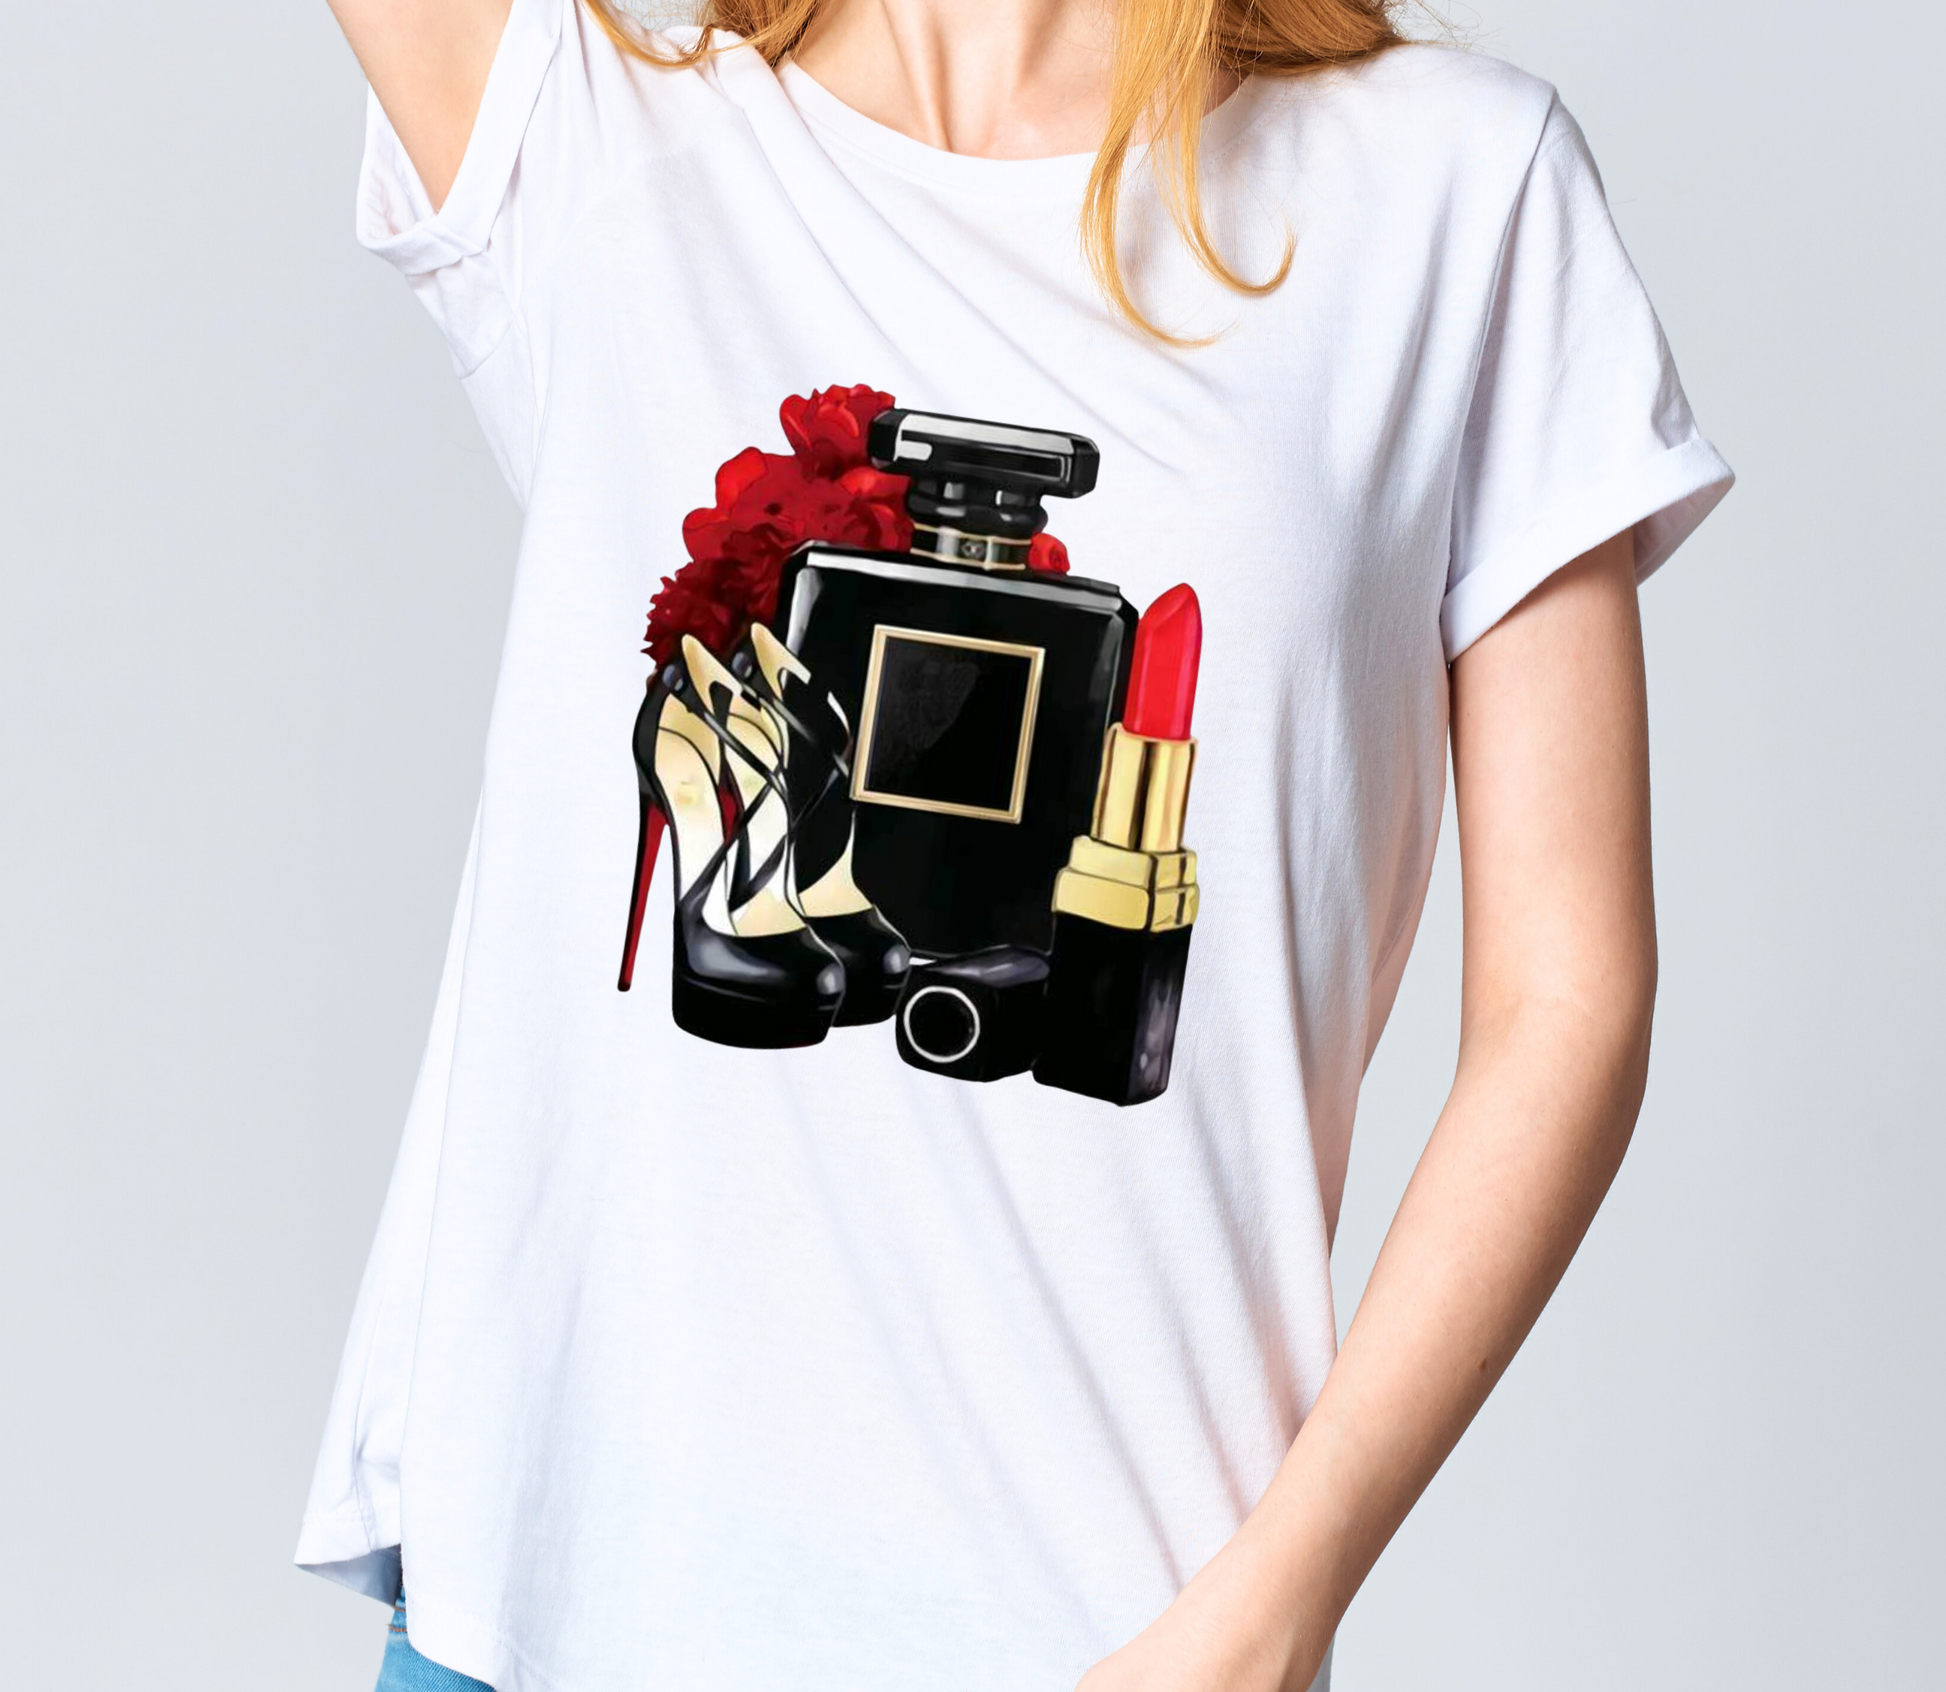 Luxury Perfume Coco Chanel Inspired Shirt, Affordable Gifts For